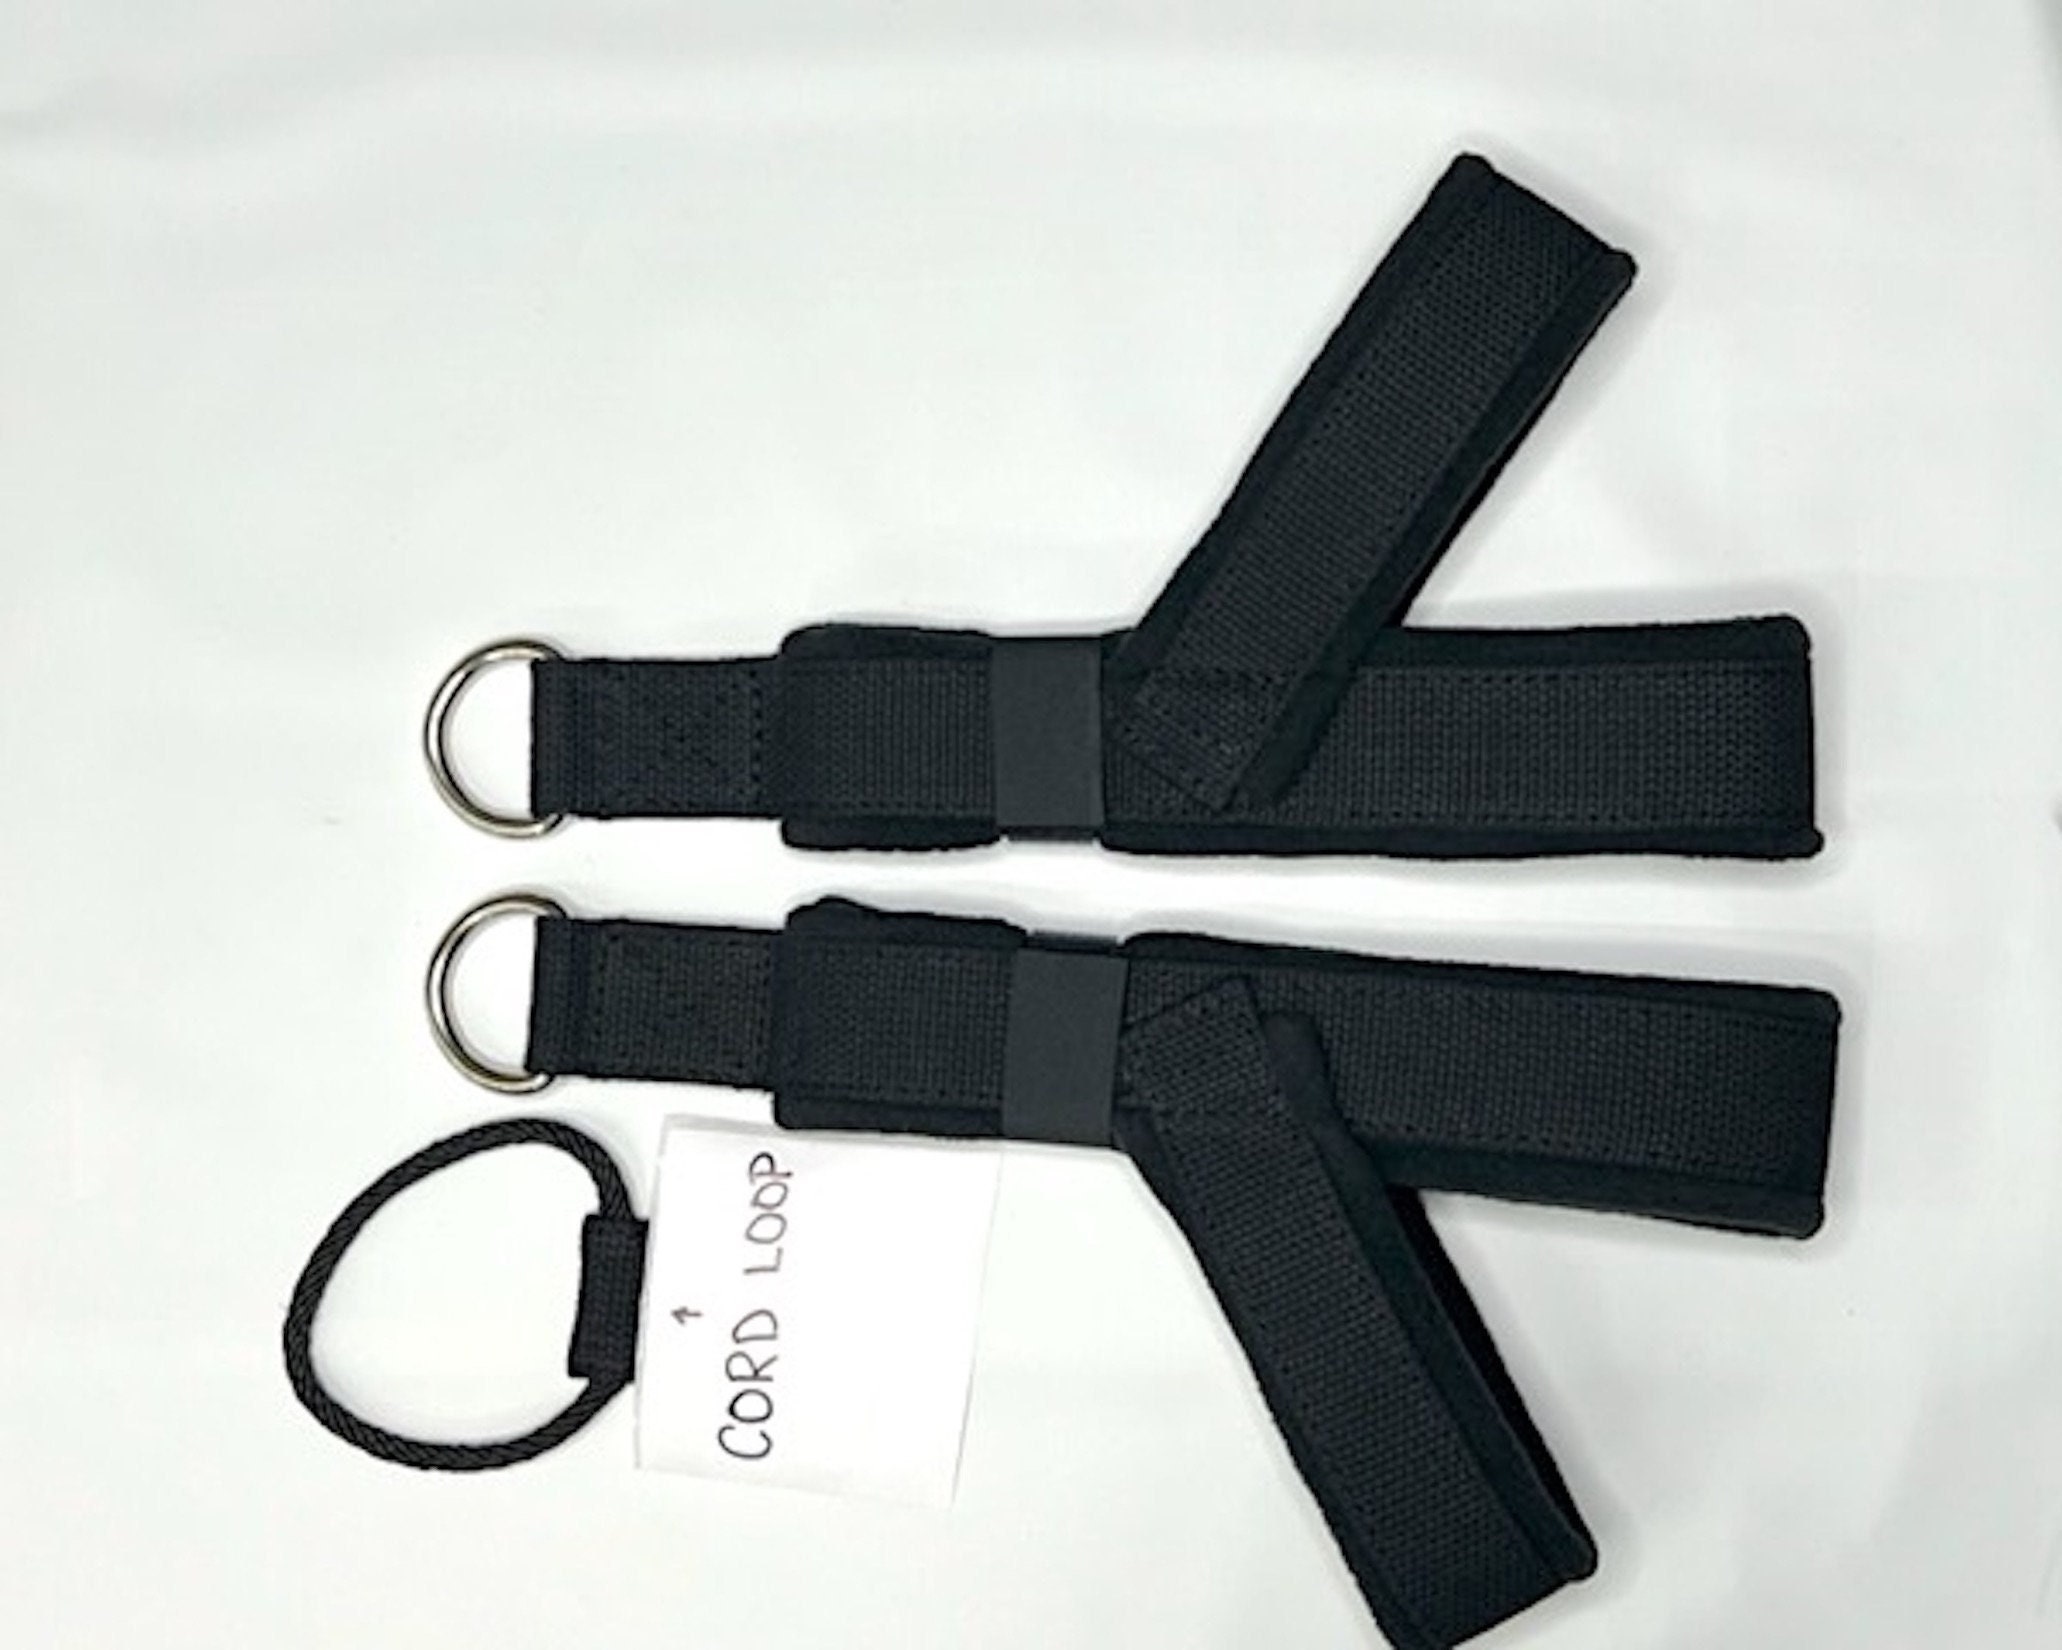 Pilates straps, Pilates personal padded Loops, Pilates padded y-loops,  pilates y loops, Gyrotonic padded loops, reformer padded y-loops